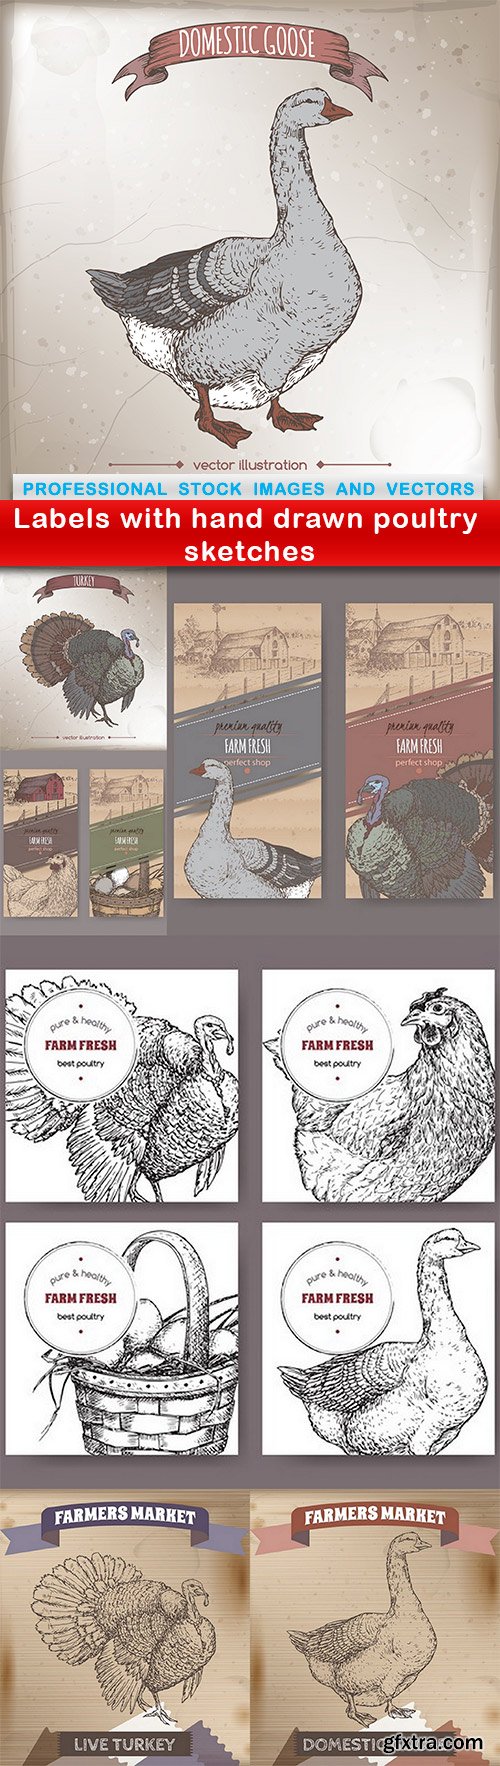 Labels with hand drawn poultry sketches - 7 EPS